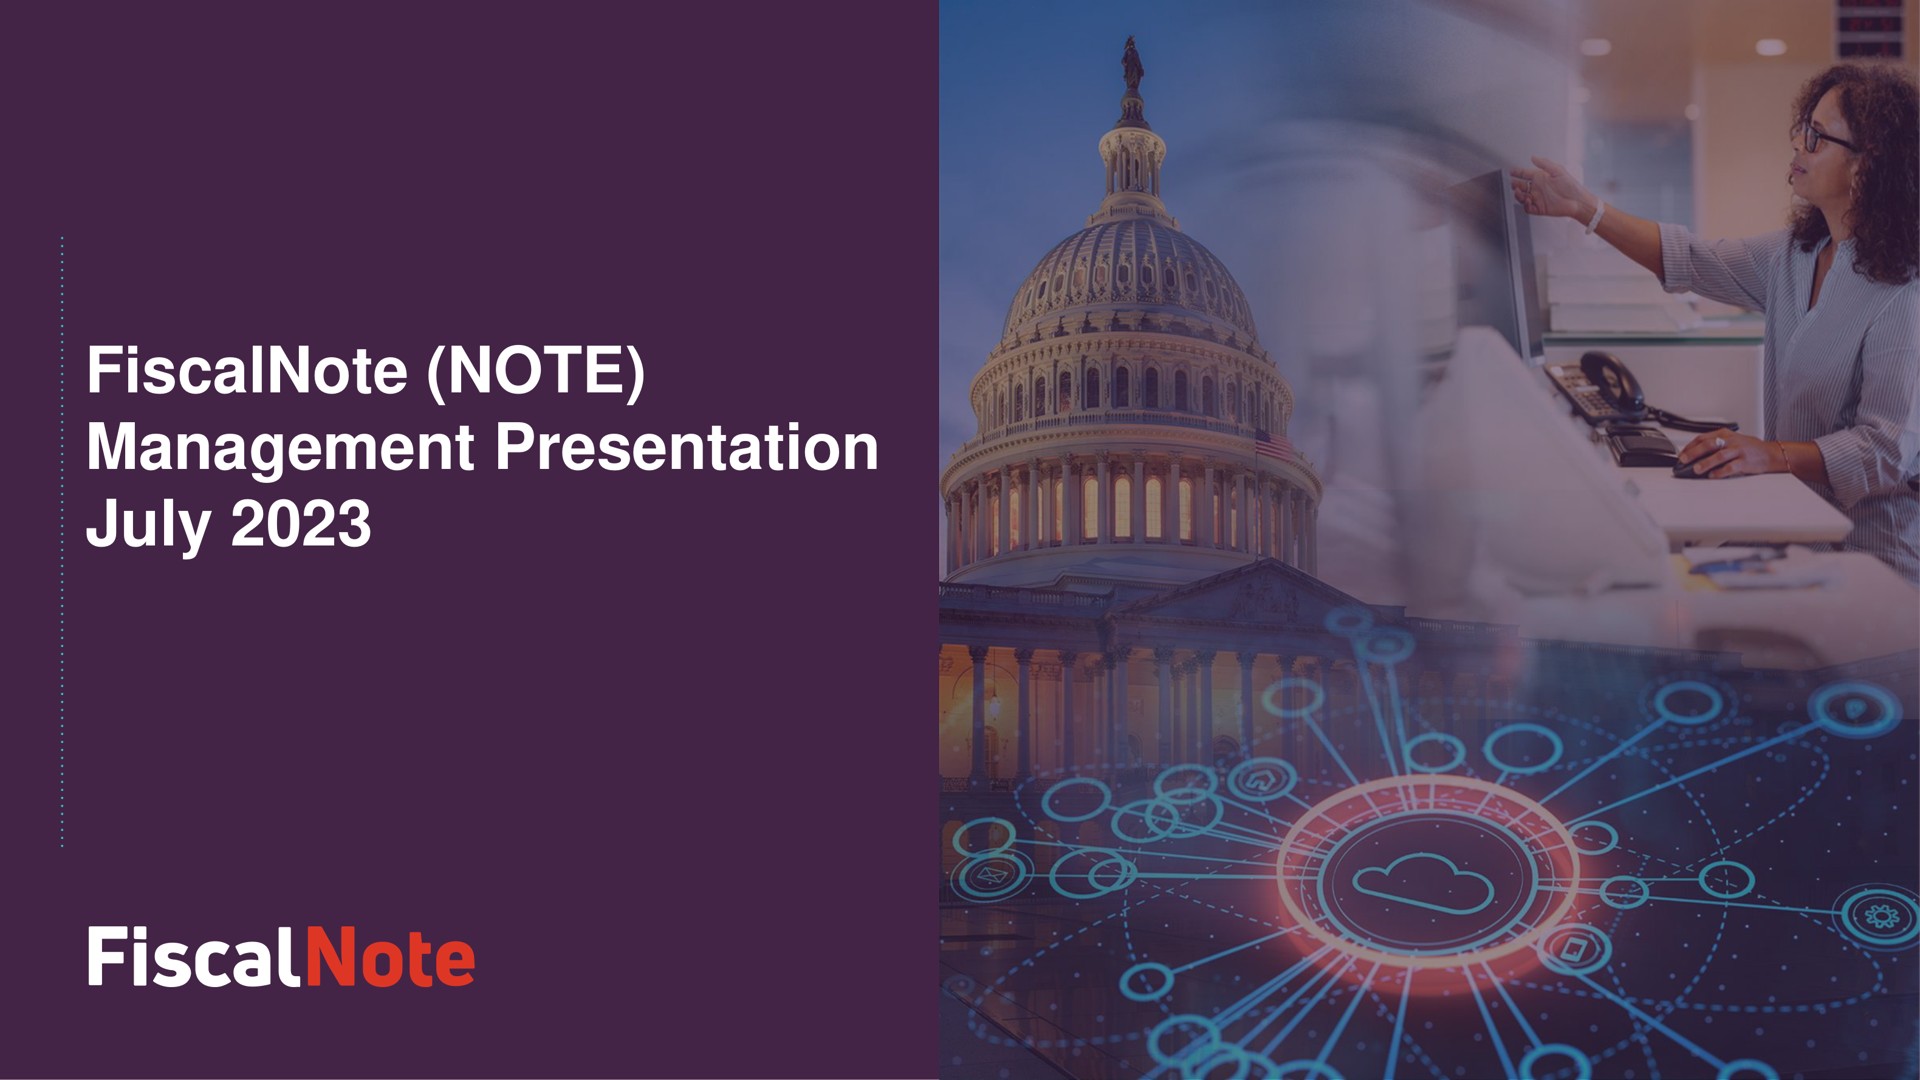 note management presentation management fiscal | FiscalNote